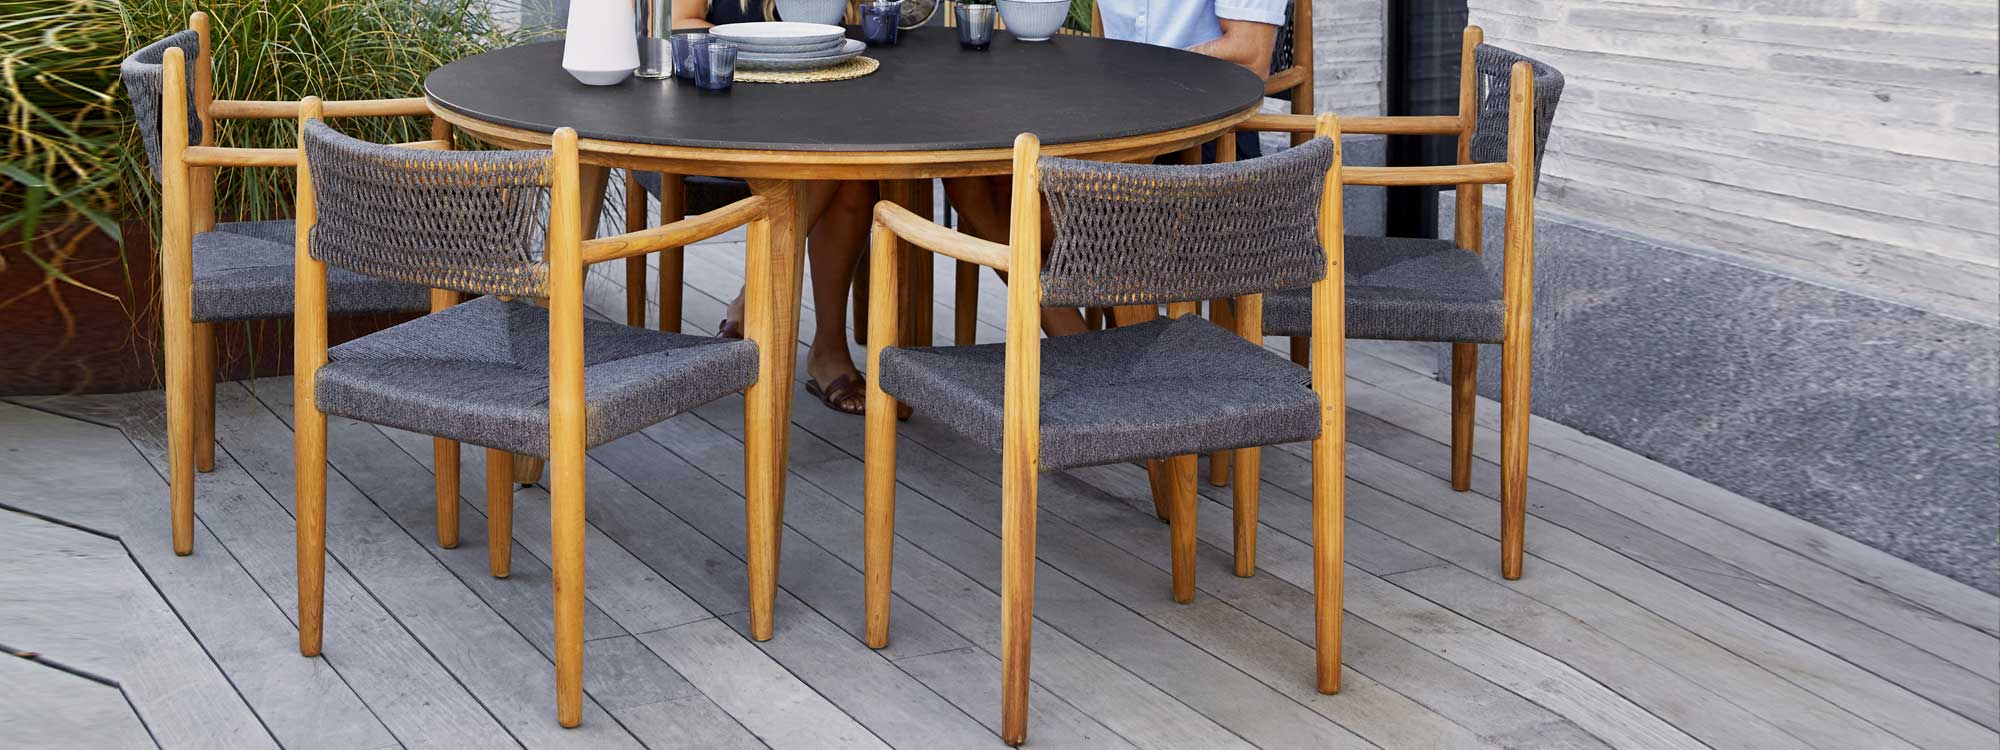 Royal TEAK Garden Dining Chair Is A MODERN OUTDOOR CARVER CHAIR In WFF High QUALITY Teak Furniture Materials By Cane-line TEAK FURNITURE